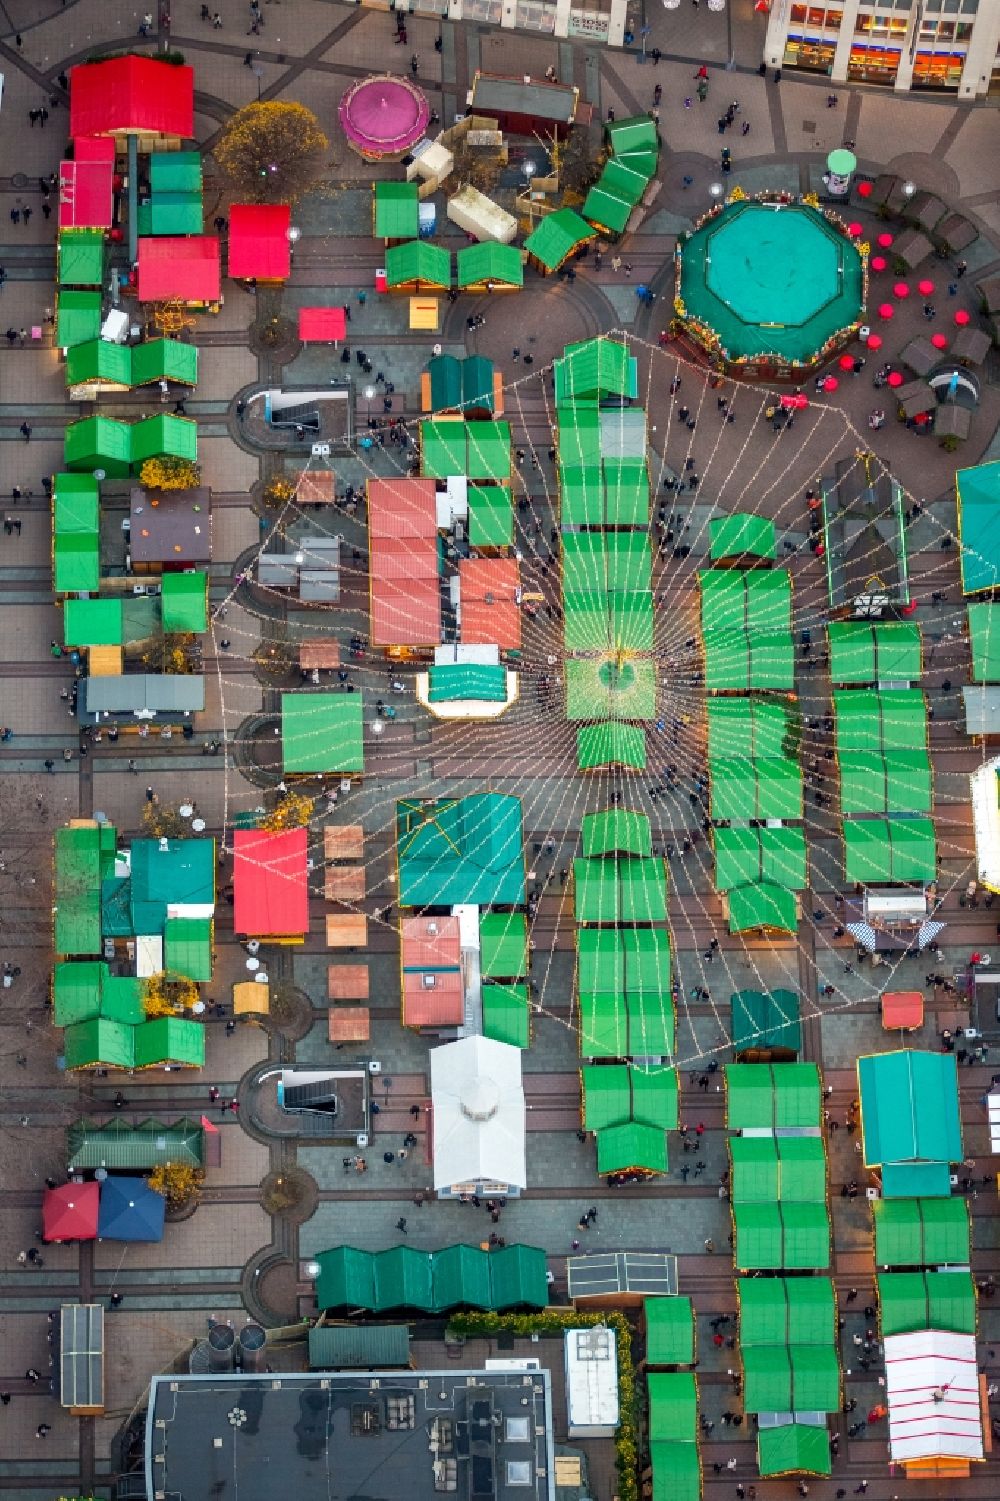 Essen from above - Christmassy market event grounds and sale huts and booths at the Kennedy square in Essen at Ruhrgebiet in the state North Rhine-Westphalia